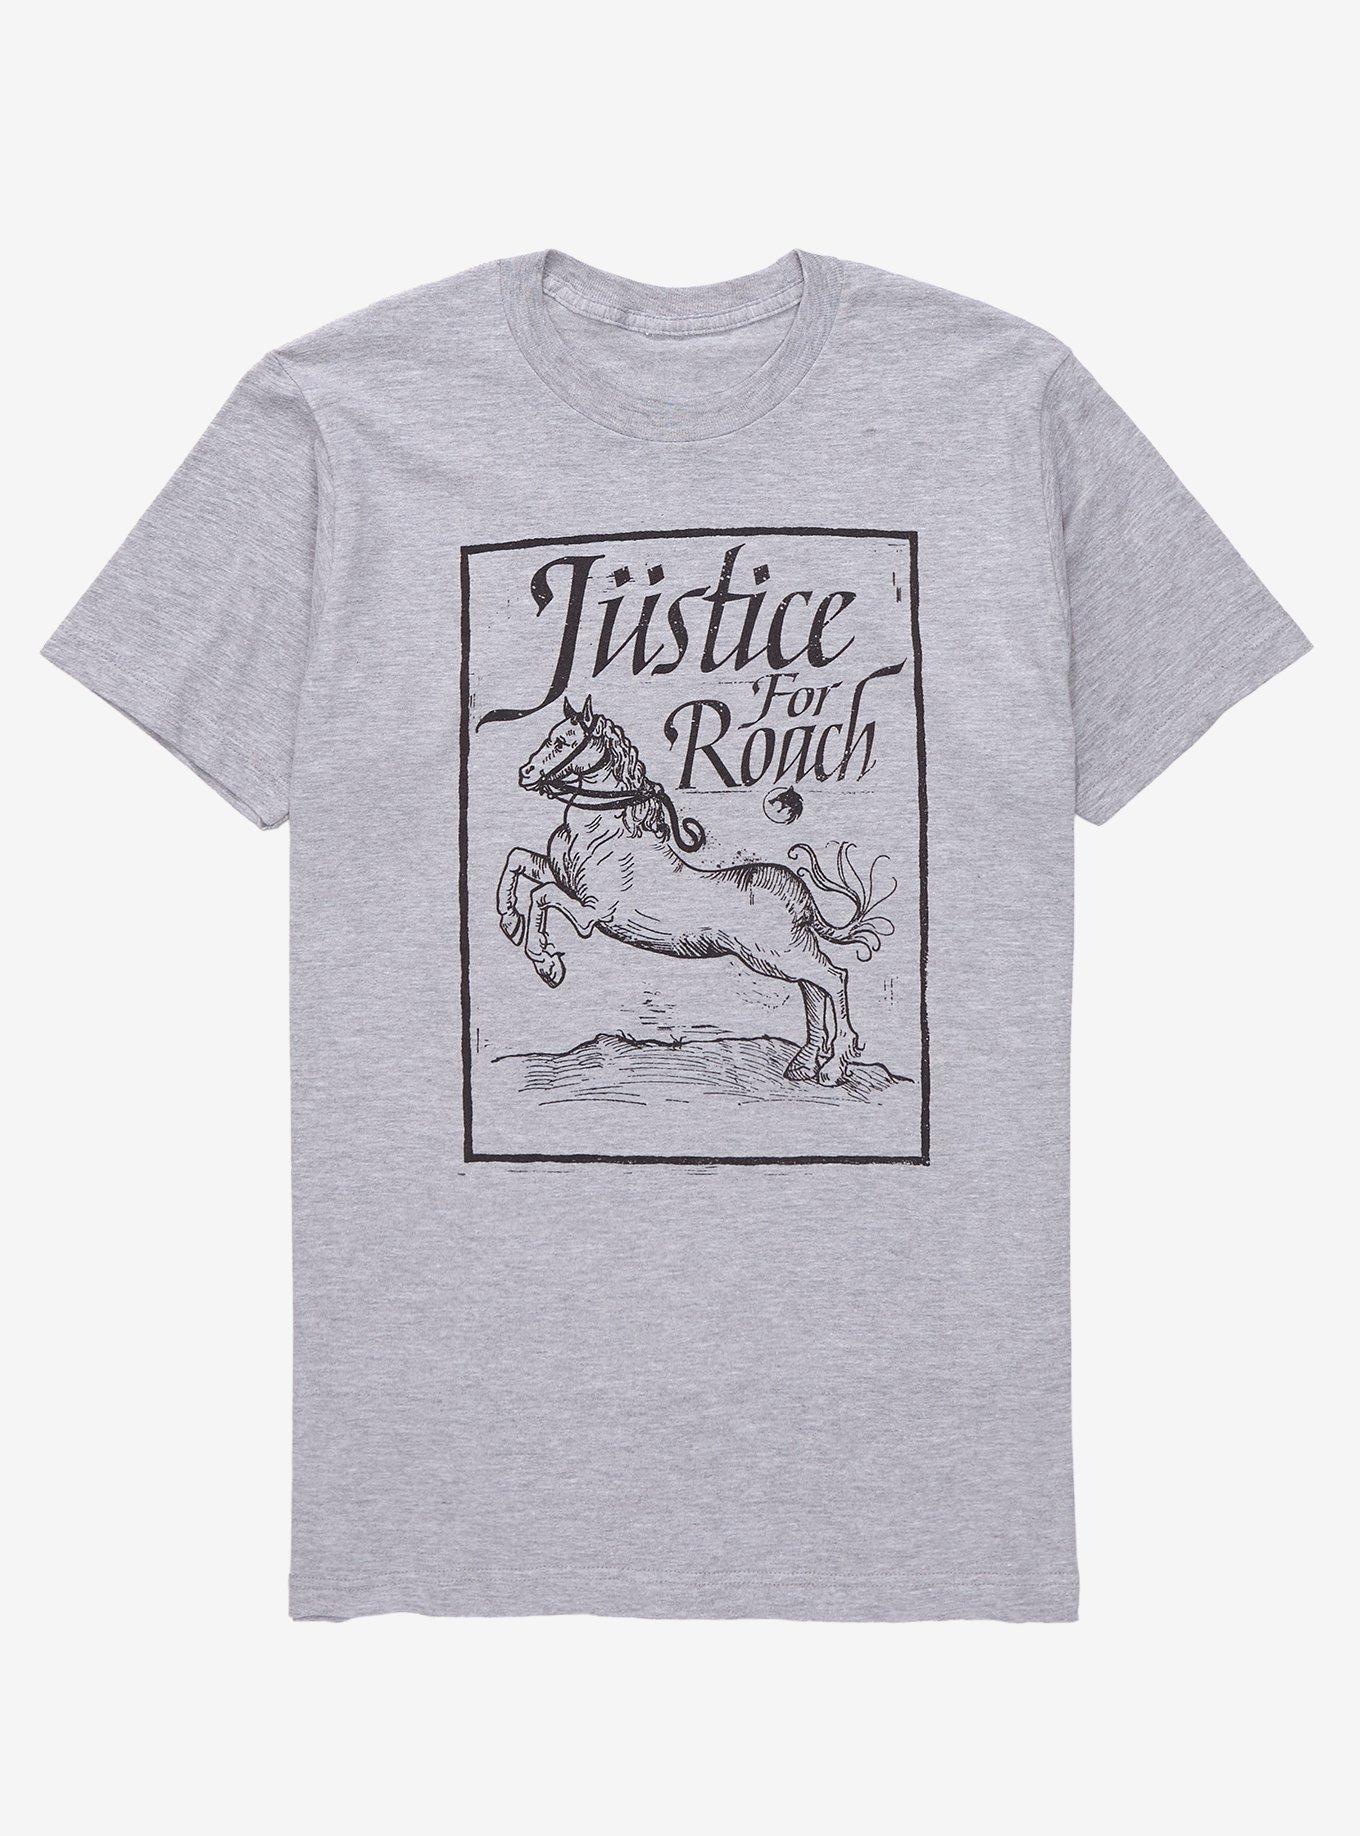 The Witcher Justice For Roach T-Shirt, GREY, hi-res